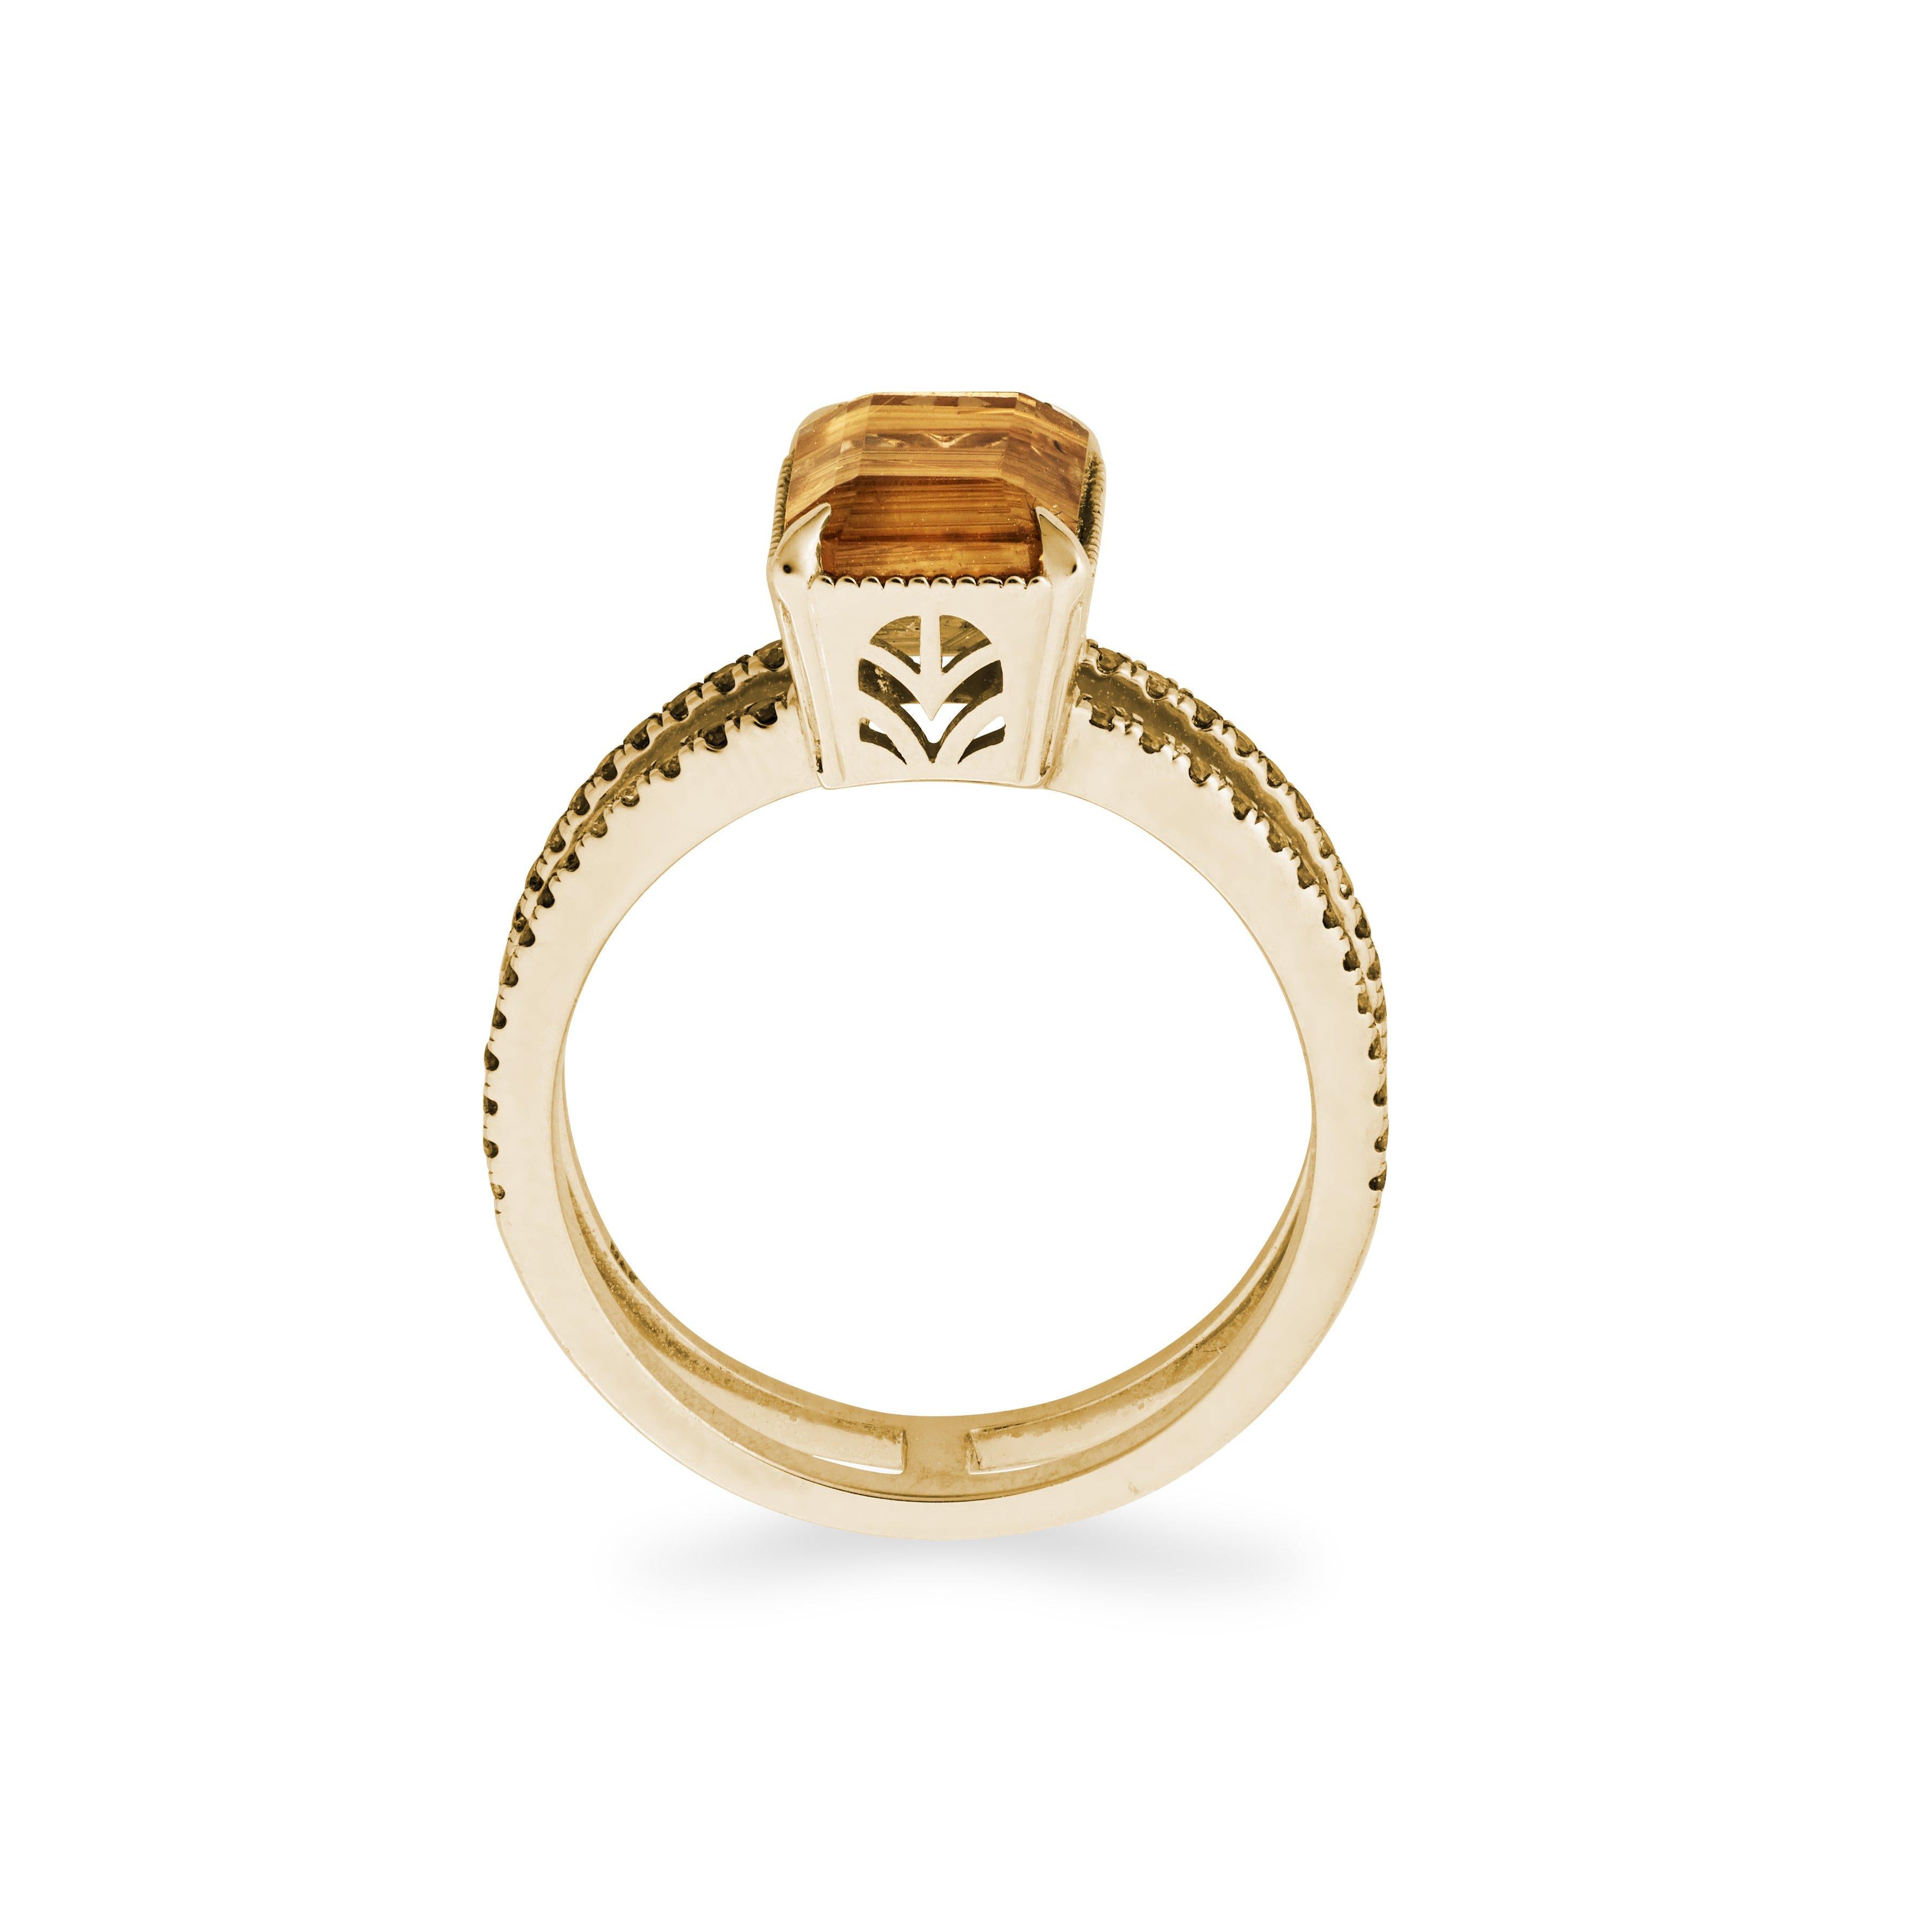 One of A Kind

This golden beauty features double bands covered in champagne diamonds that perfectly accent the fair trade Brazilian rutilated quartz center stone. A unique engagement ring option, or the perfect cocktail ring, the inclusions of the